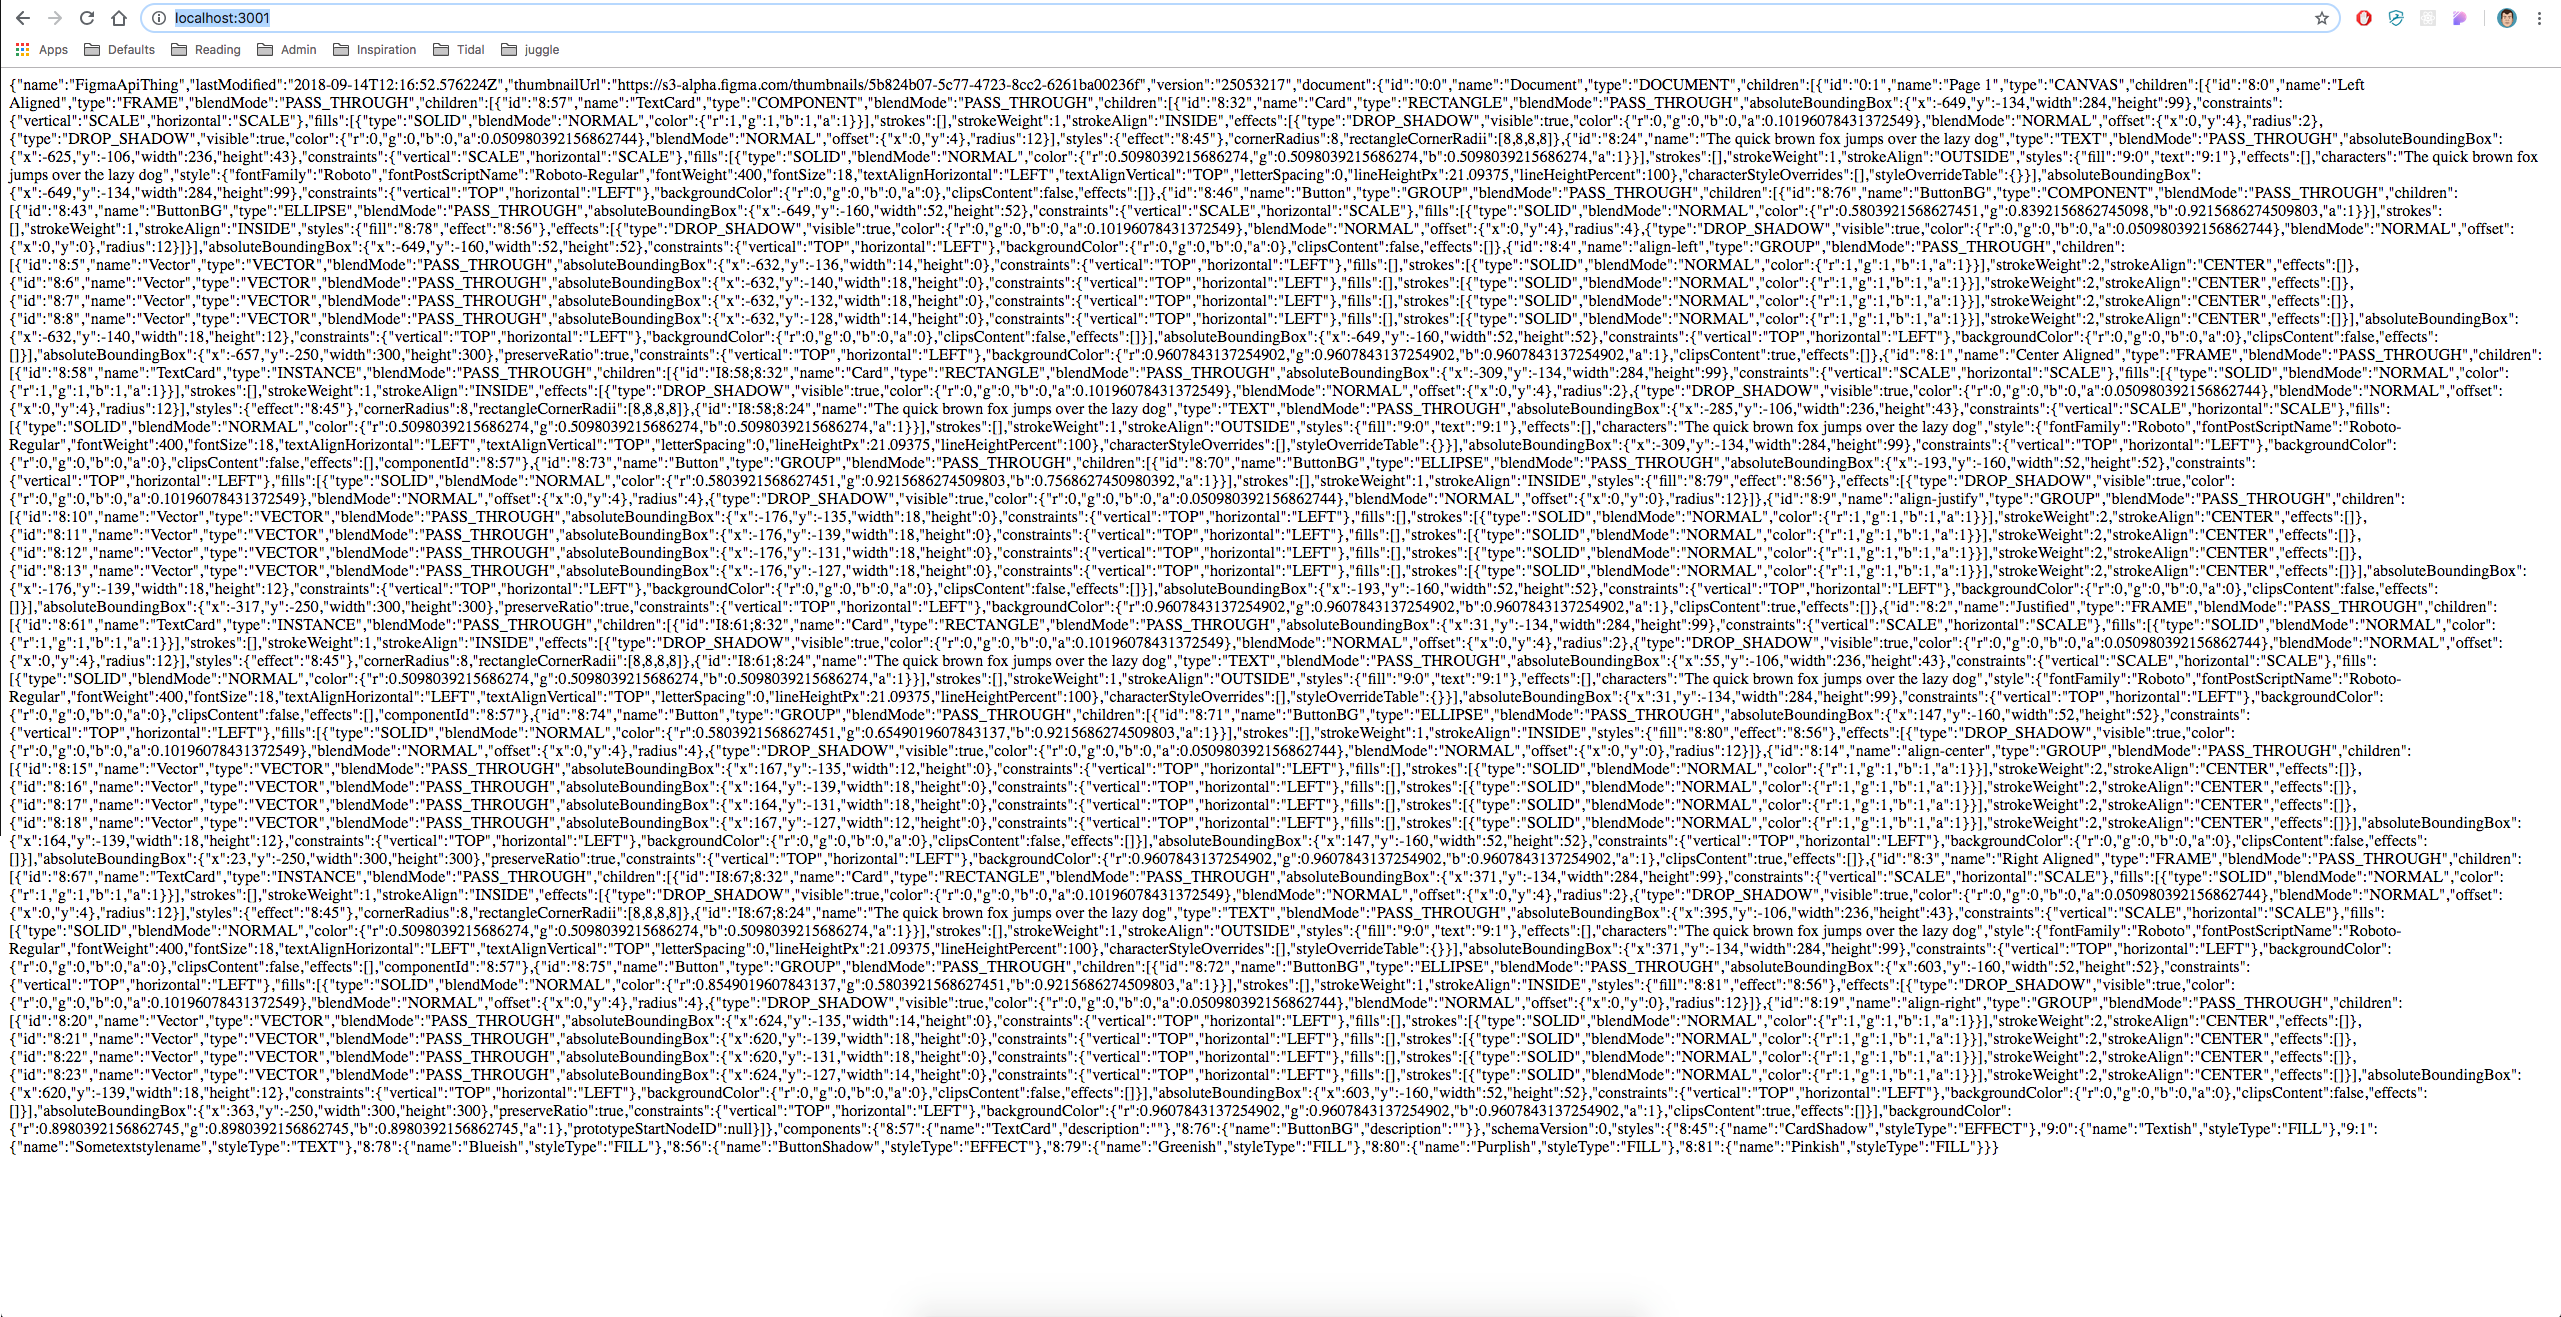 A screenshot of a browser window displaying unformatted JSON data.